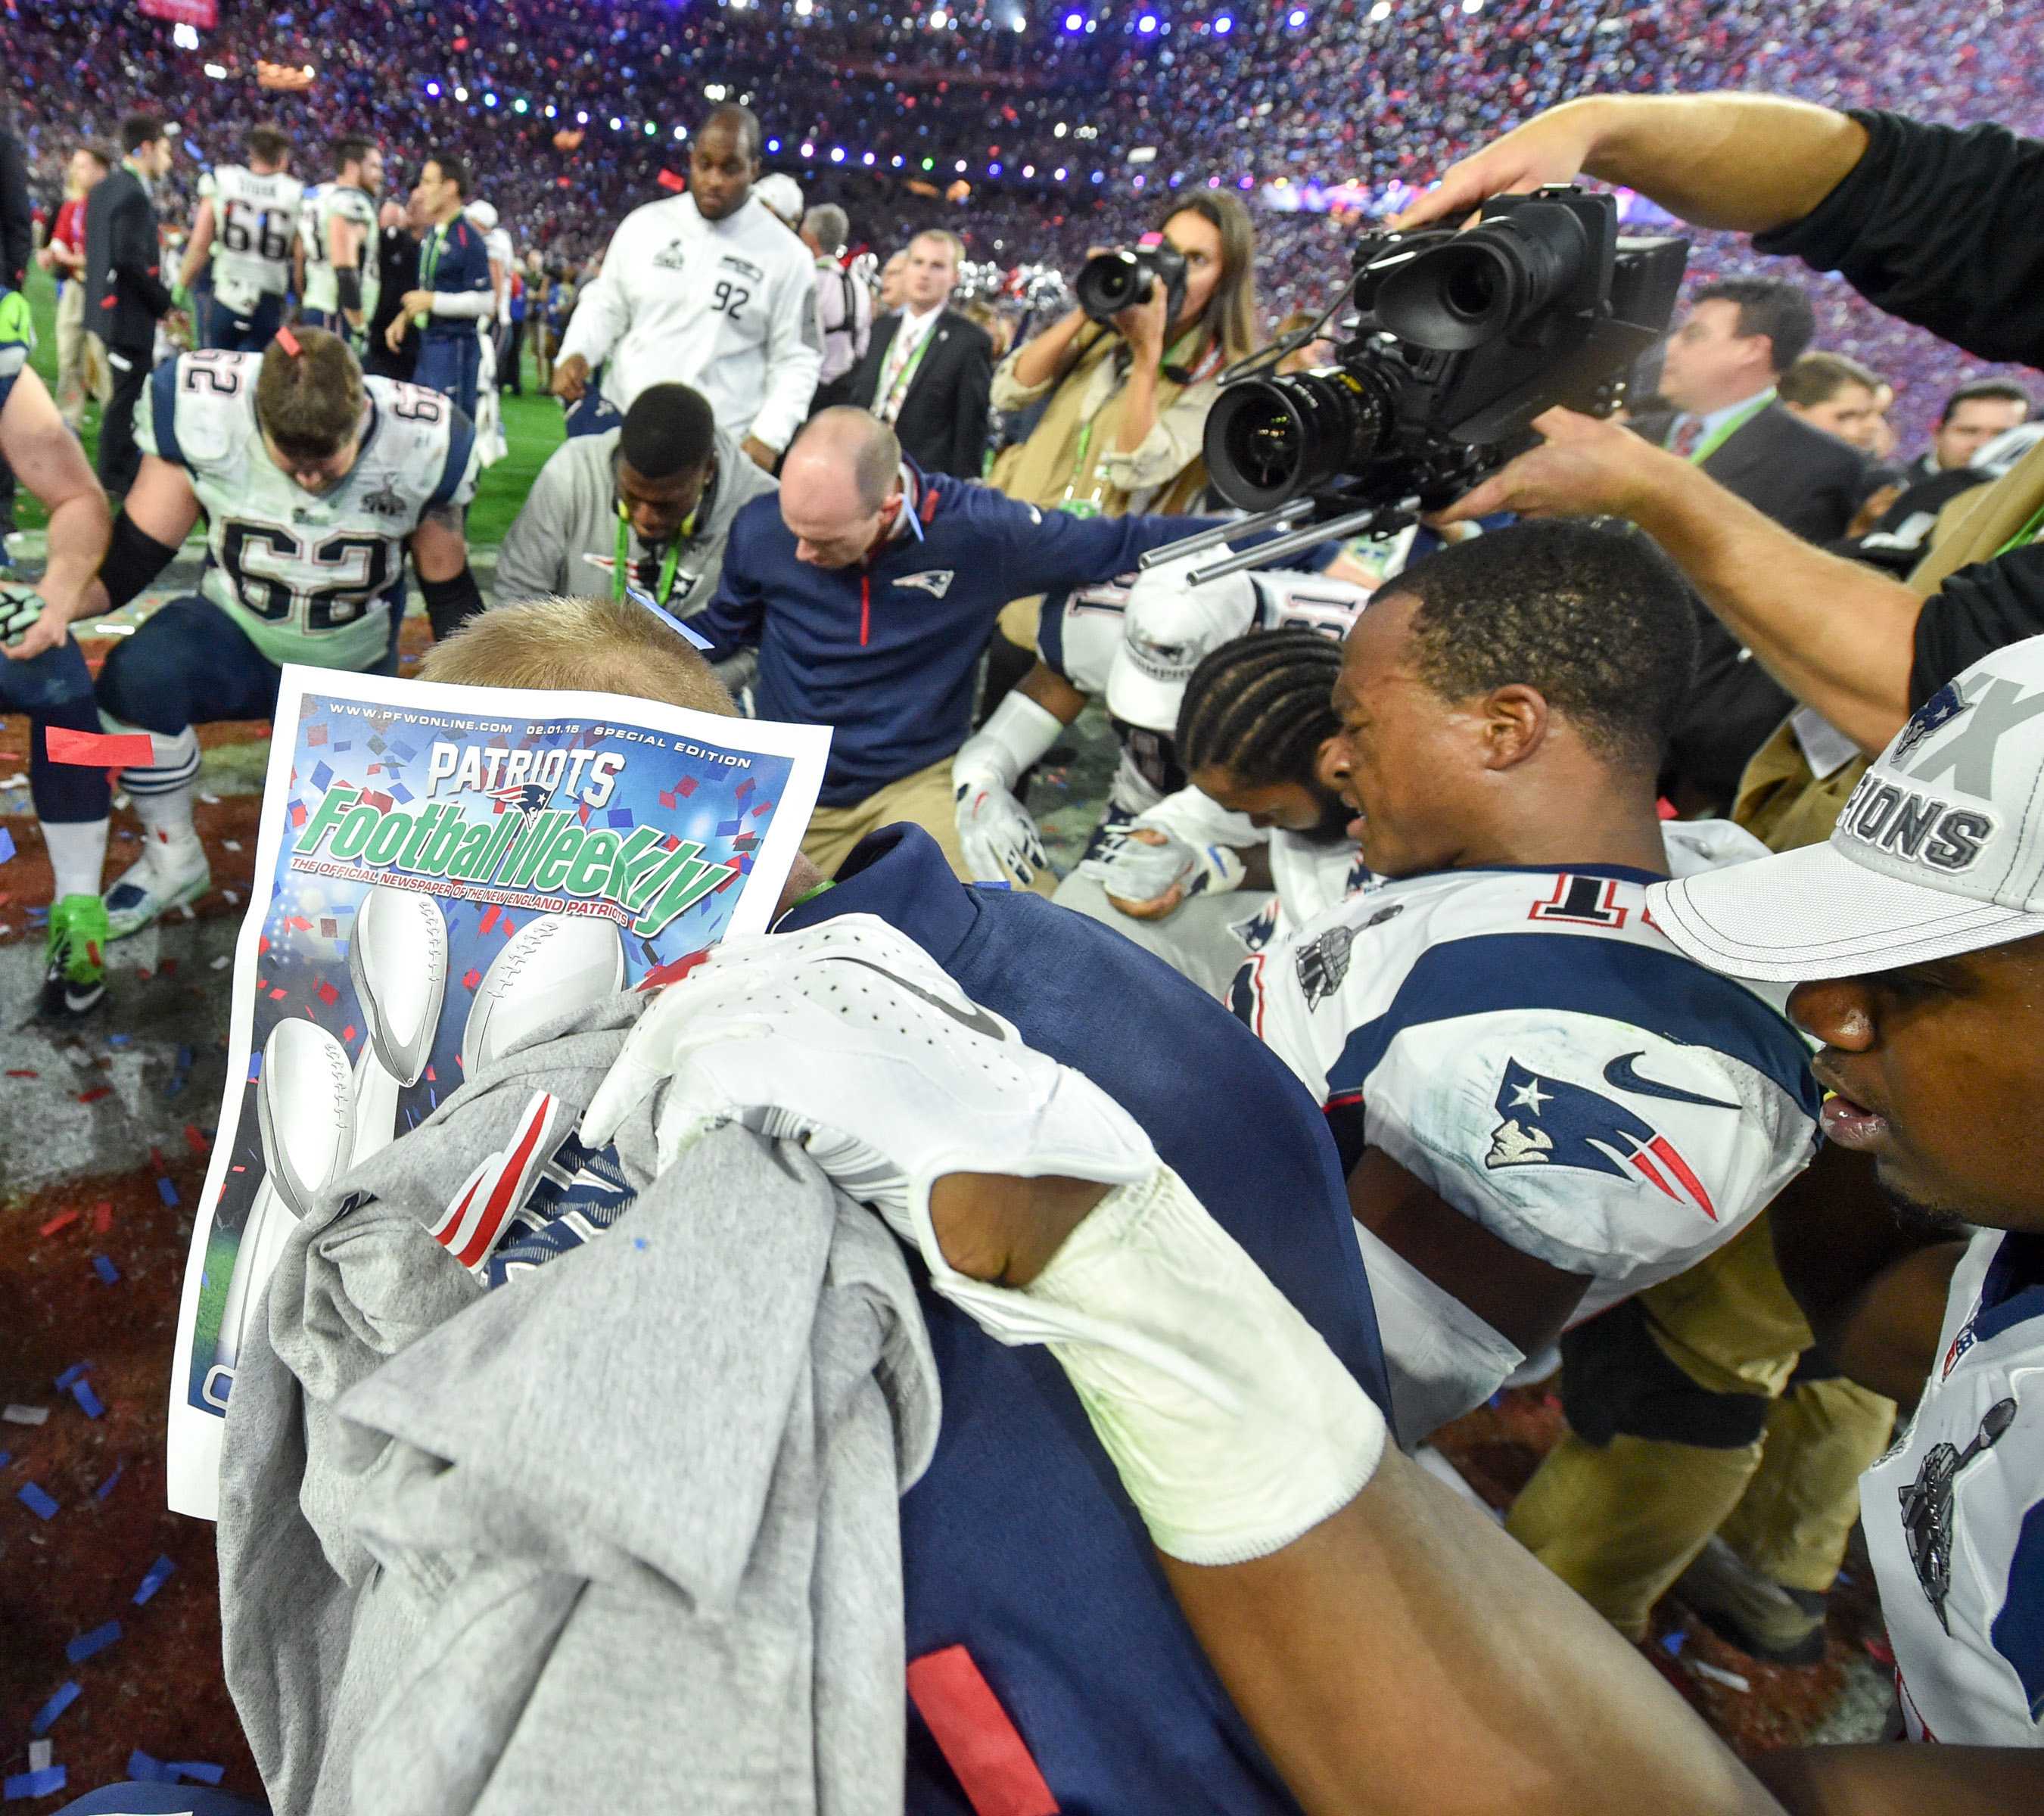 The New England Patriots won Super Bowl XLIV for the fourth time in franchise history, with a 28-24 victory over the Seattle Seahawks at the University of Phoenix Stadium on Feb. 1, 2015 in Glendale, Ariz. (Anthony Behar/SIPA USA/TNS)